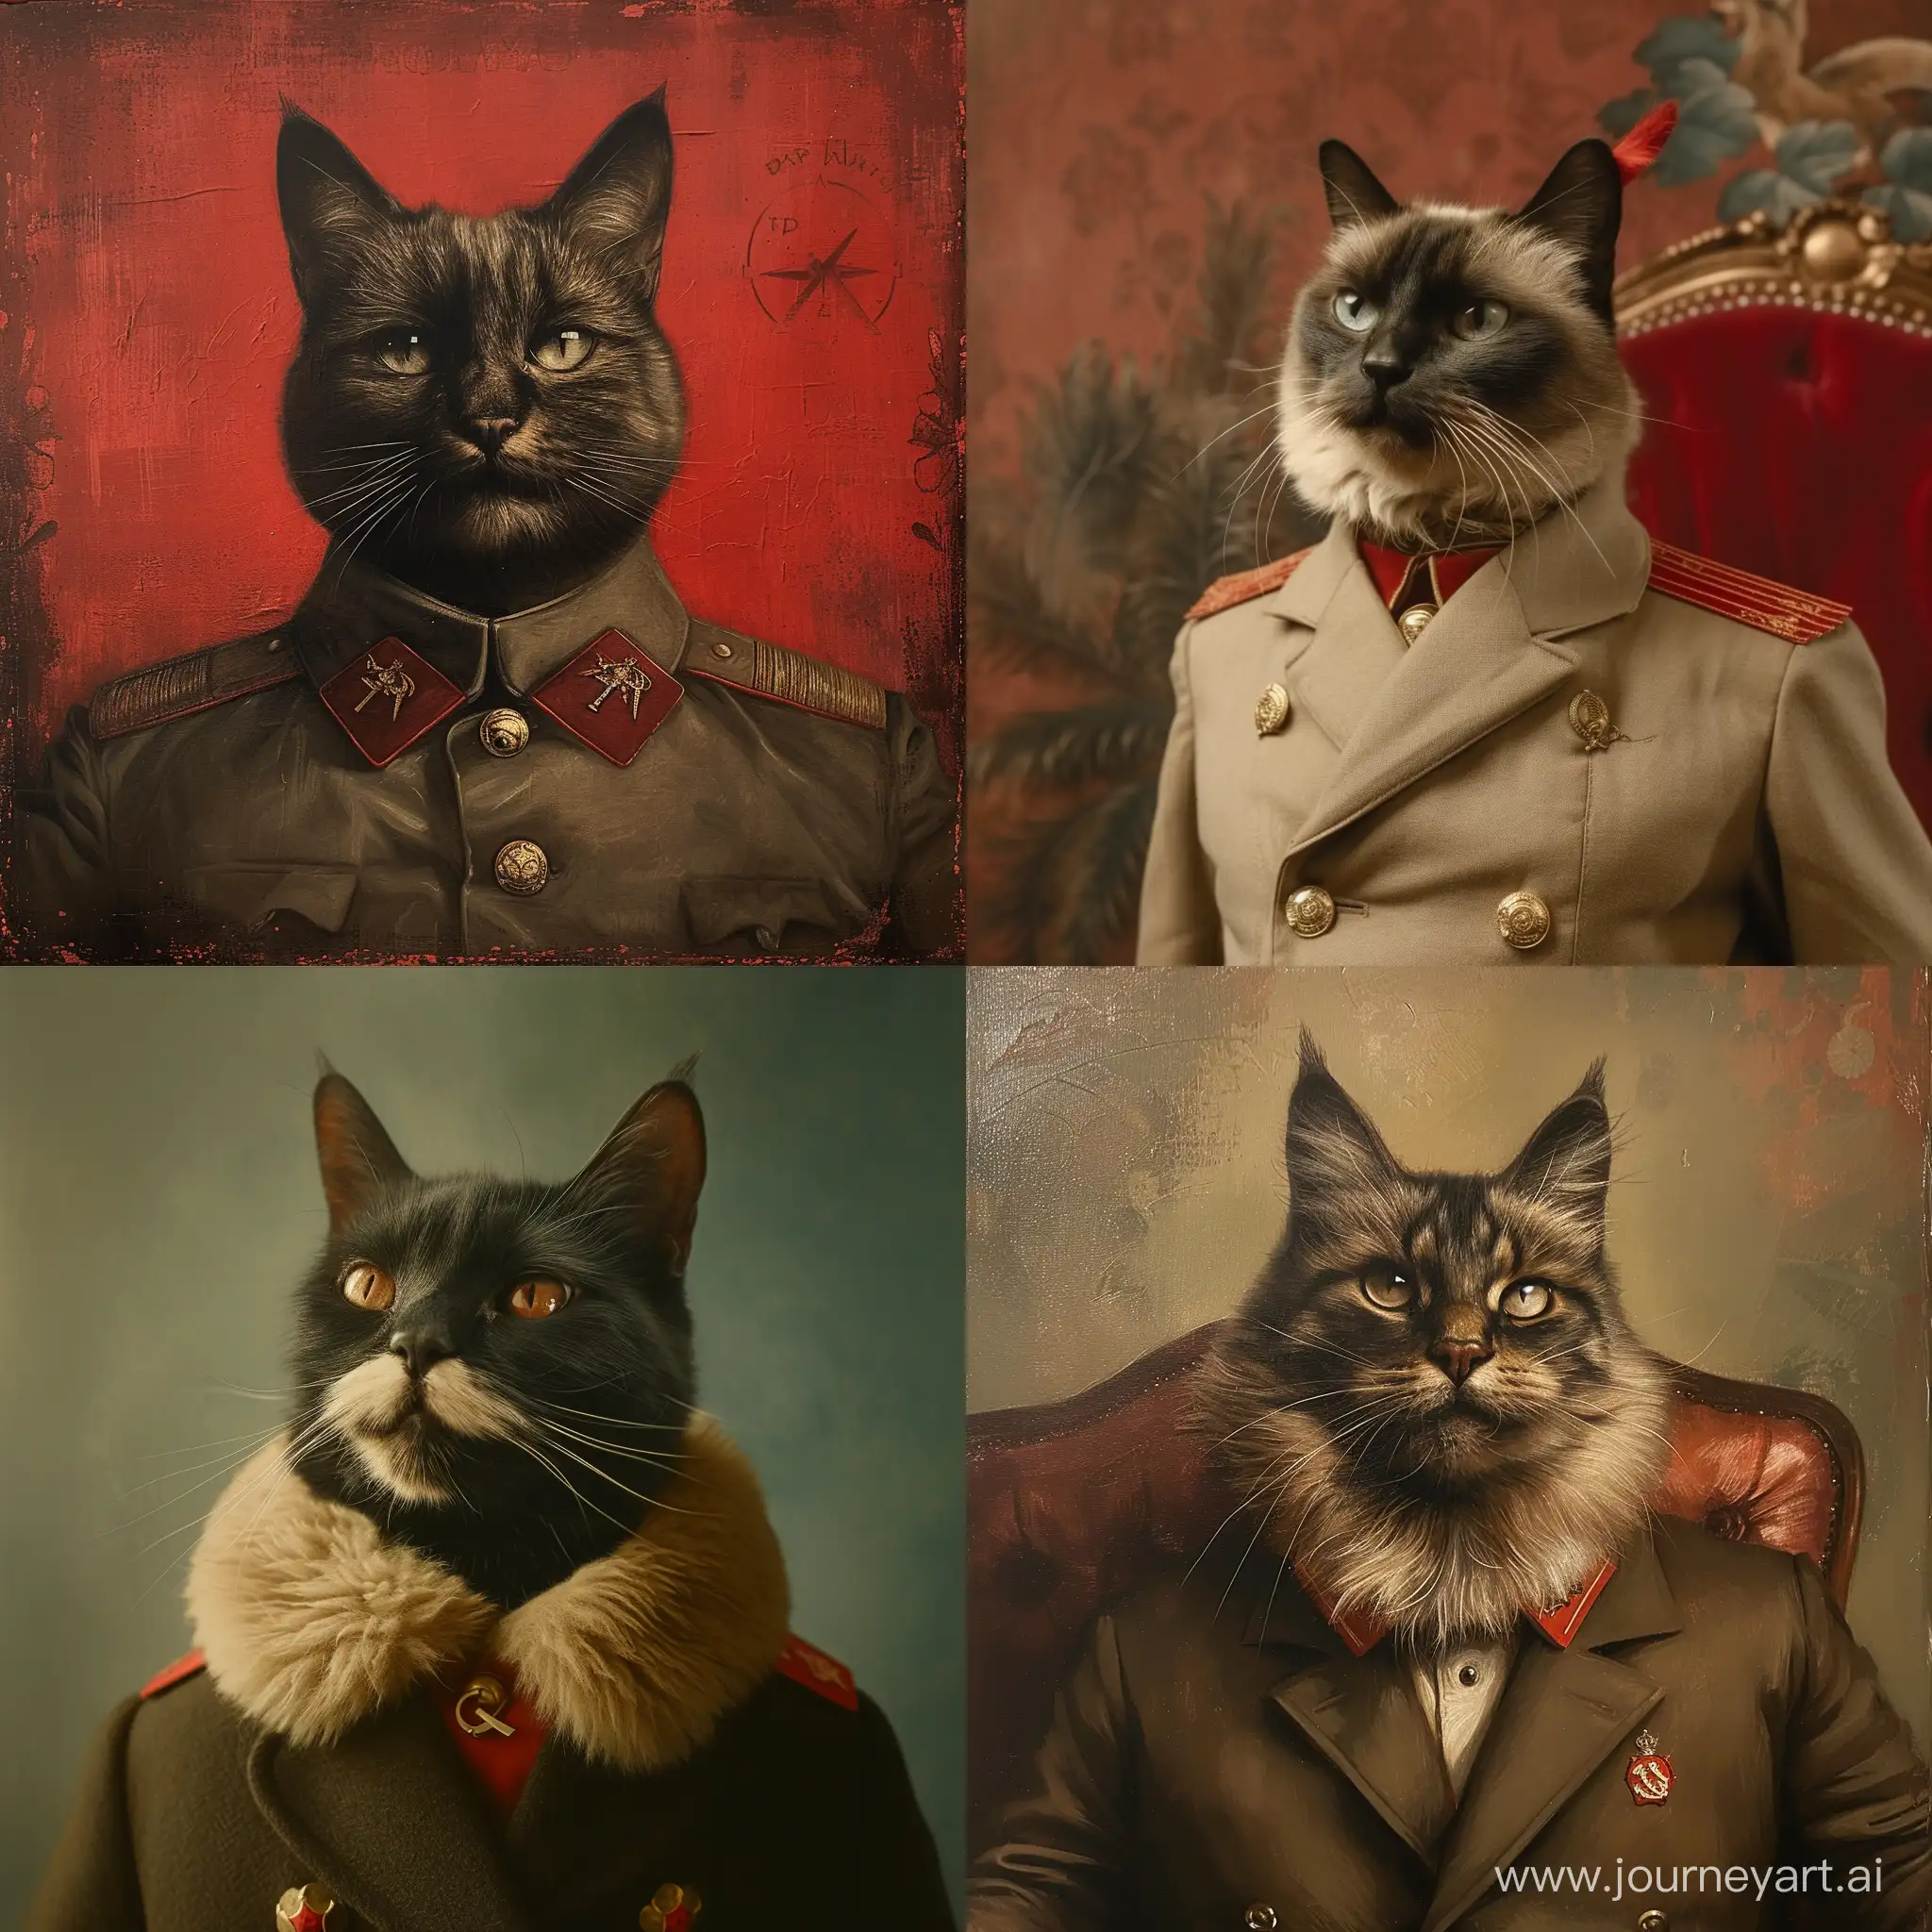 Kitty-Portrayed-as-Joseph-Stalin-in-Official-Portrait